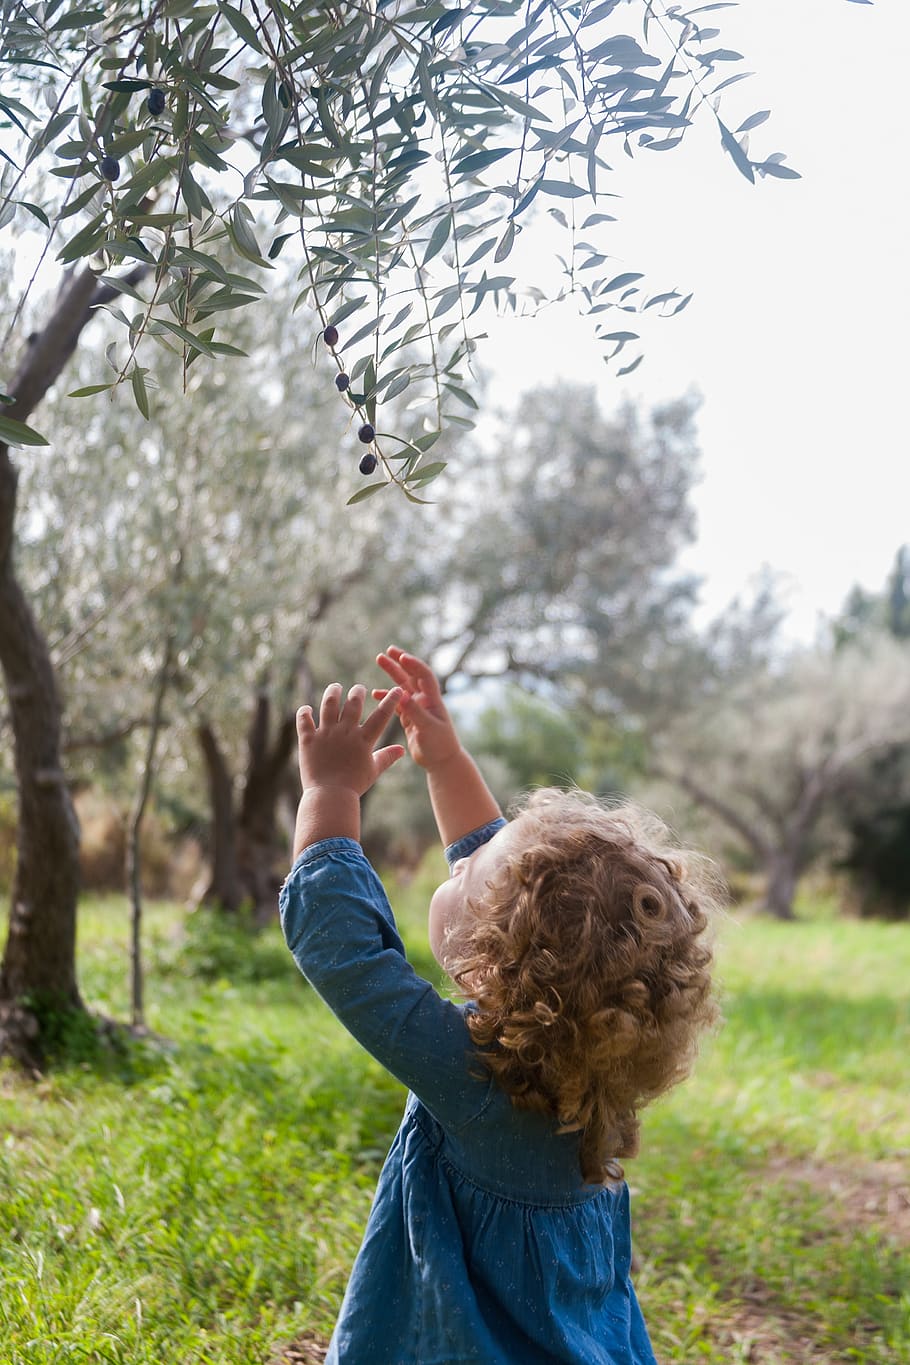 olives, campaign, agriculture, oliva, tree, mediterranean, branch, little girl, curly, plant